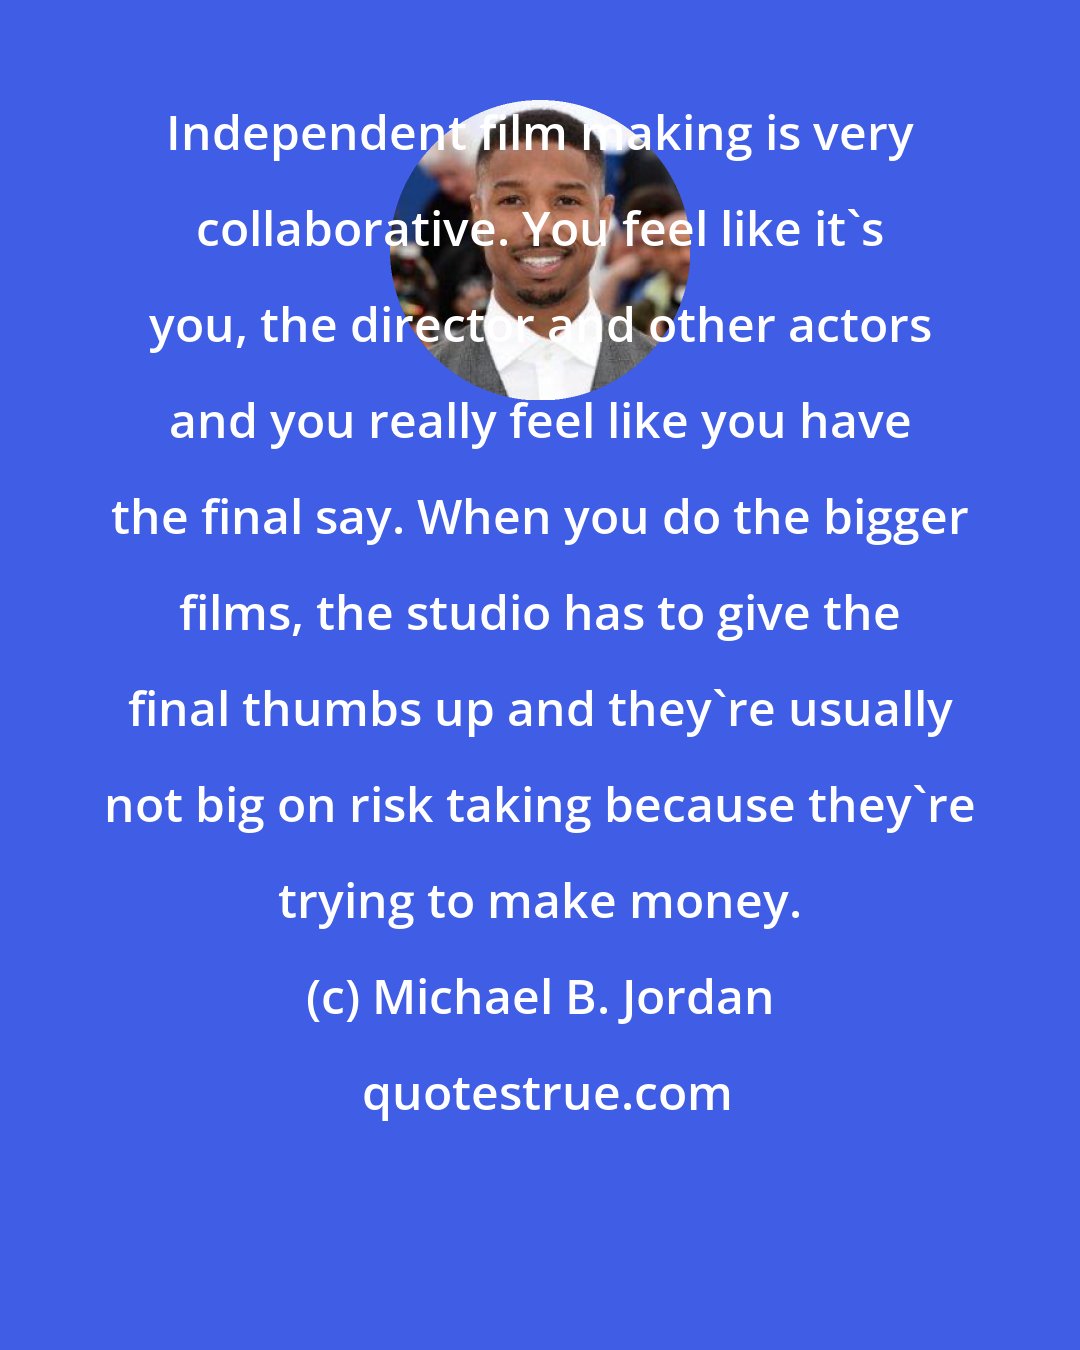 Michael B. Jordan: Independent film making is very collaborative. You feel like it's you, the director and other actors and you really feel like you have the final say. When you do the bigger films, the studio has to give the final thumbs up and they're usually not big on risk taking because they're trying to make money.